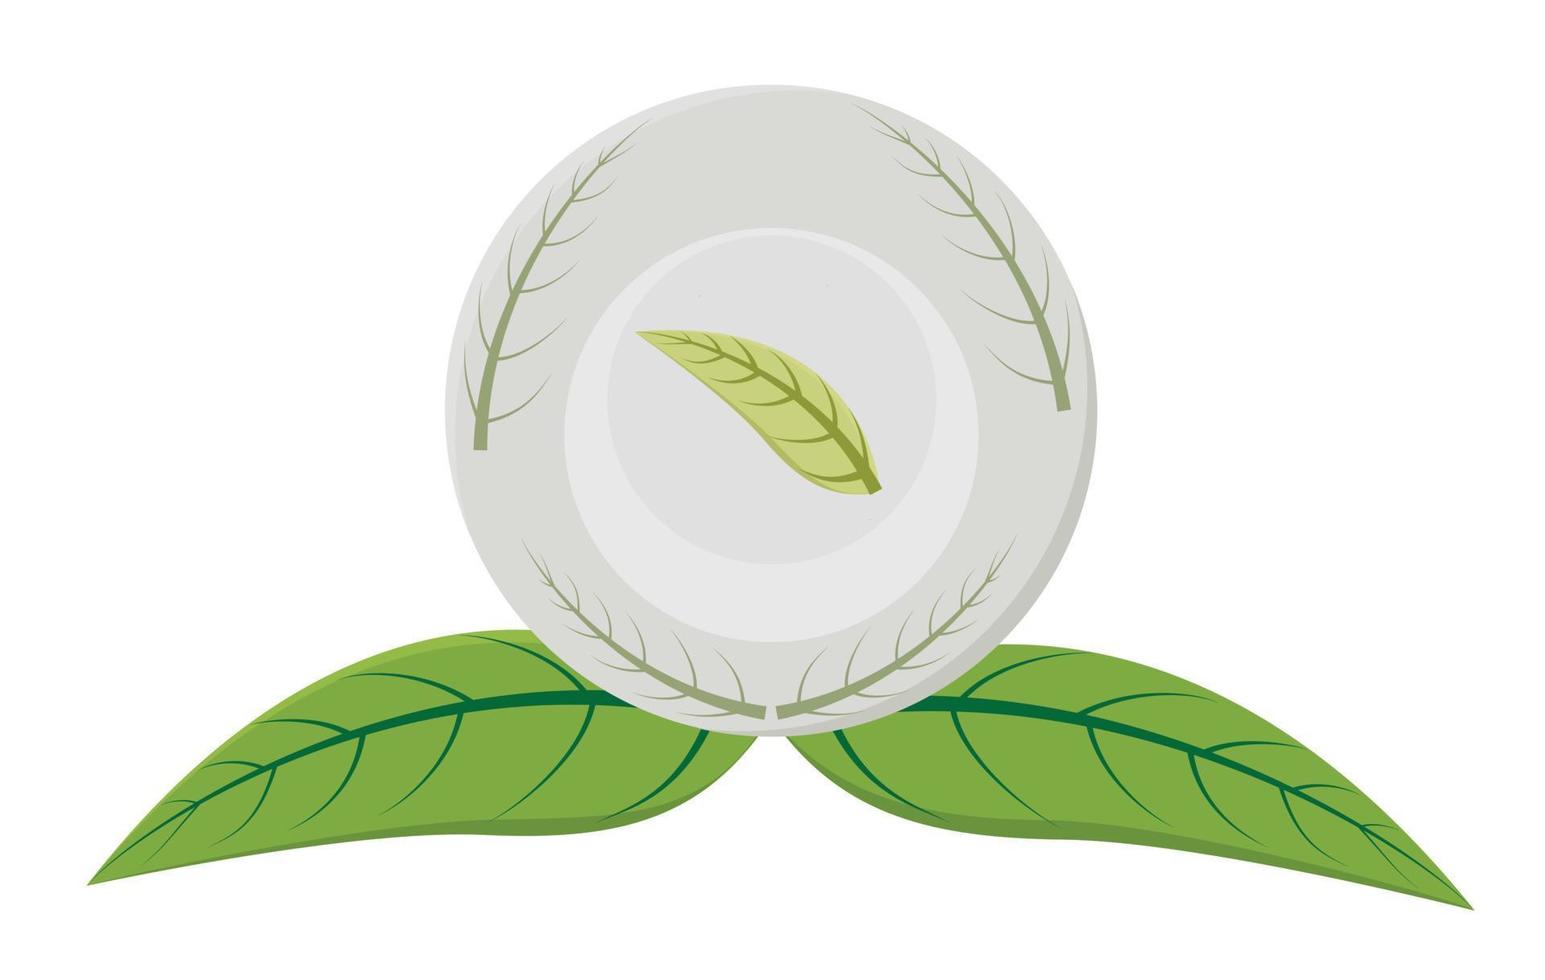 Crystal ball and leaves vector